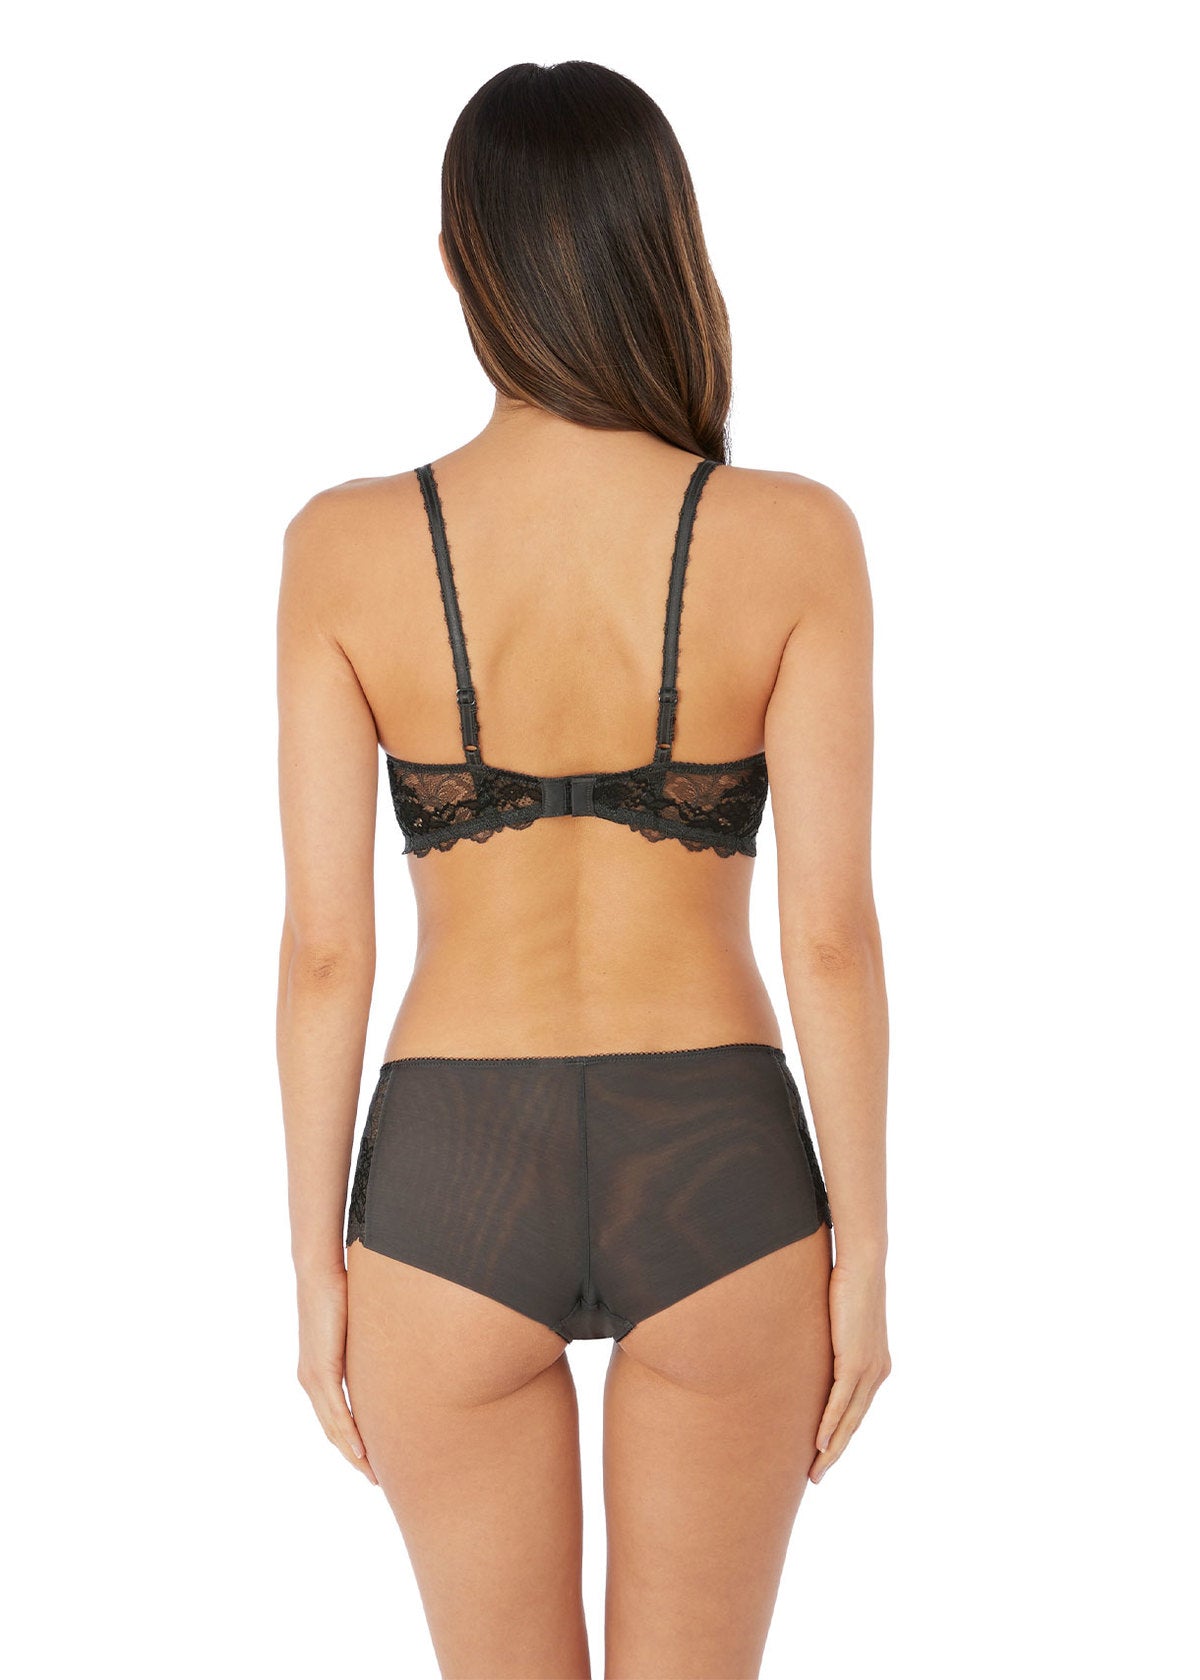 Lace Perfection Shorty Brief